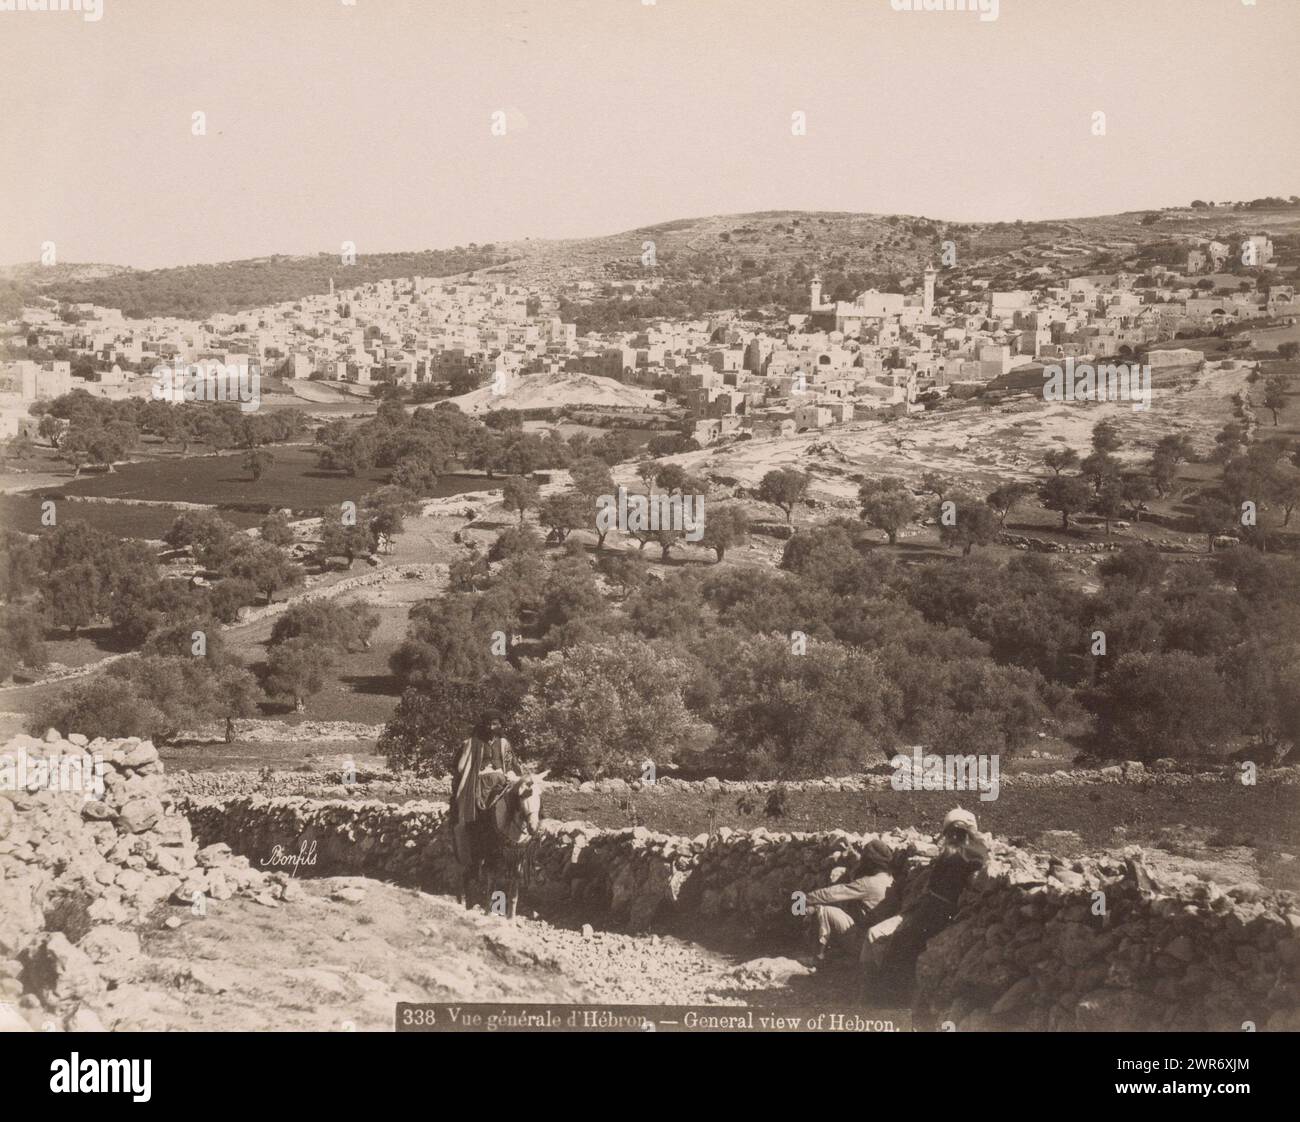 View of Hebron, Vue générale d'Hebron.- General view of Hebron. (title on object), Part of Travel album with photos of Jerusalem and other biblical places., Maison Bonfils, Hebron, c. 1867 - c. 1895, cardboard, albumen print, height 222 mm × width 279 mm, photograph Stock Photo